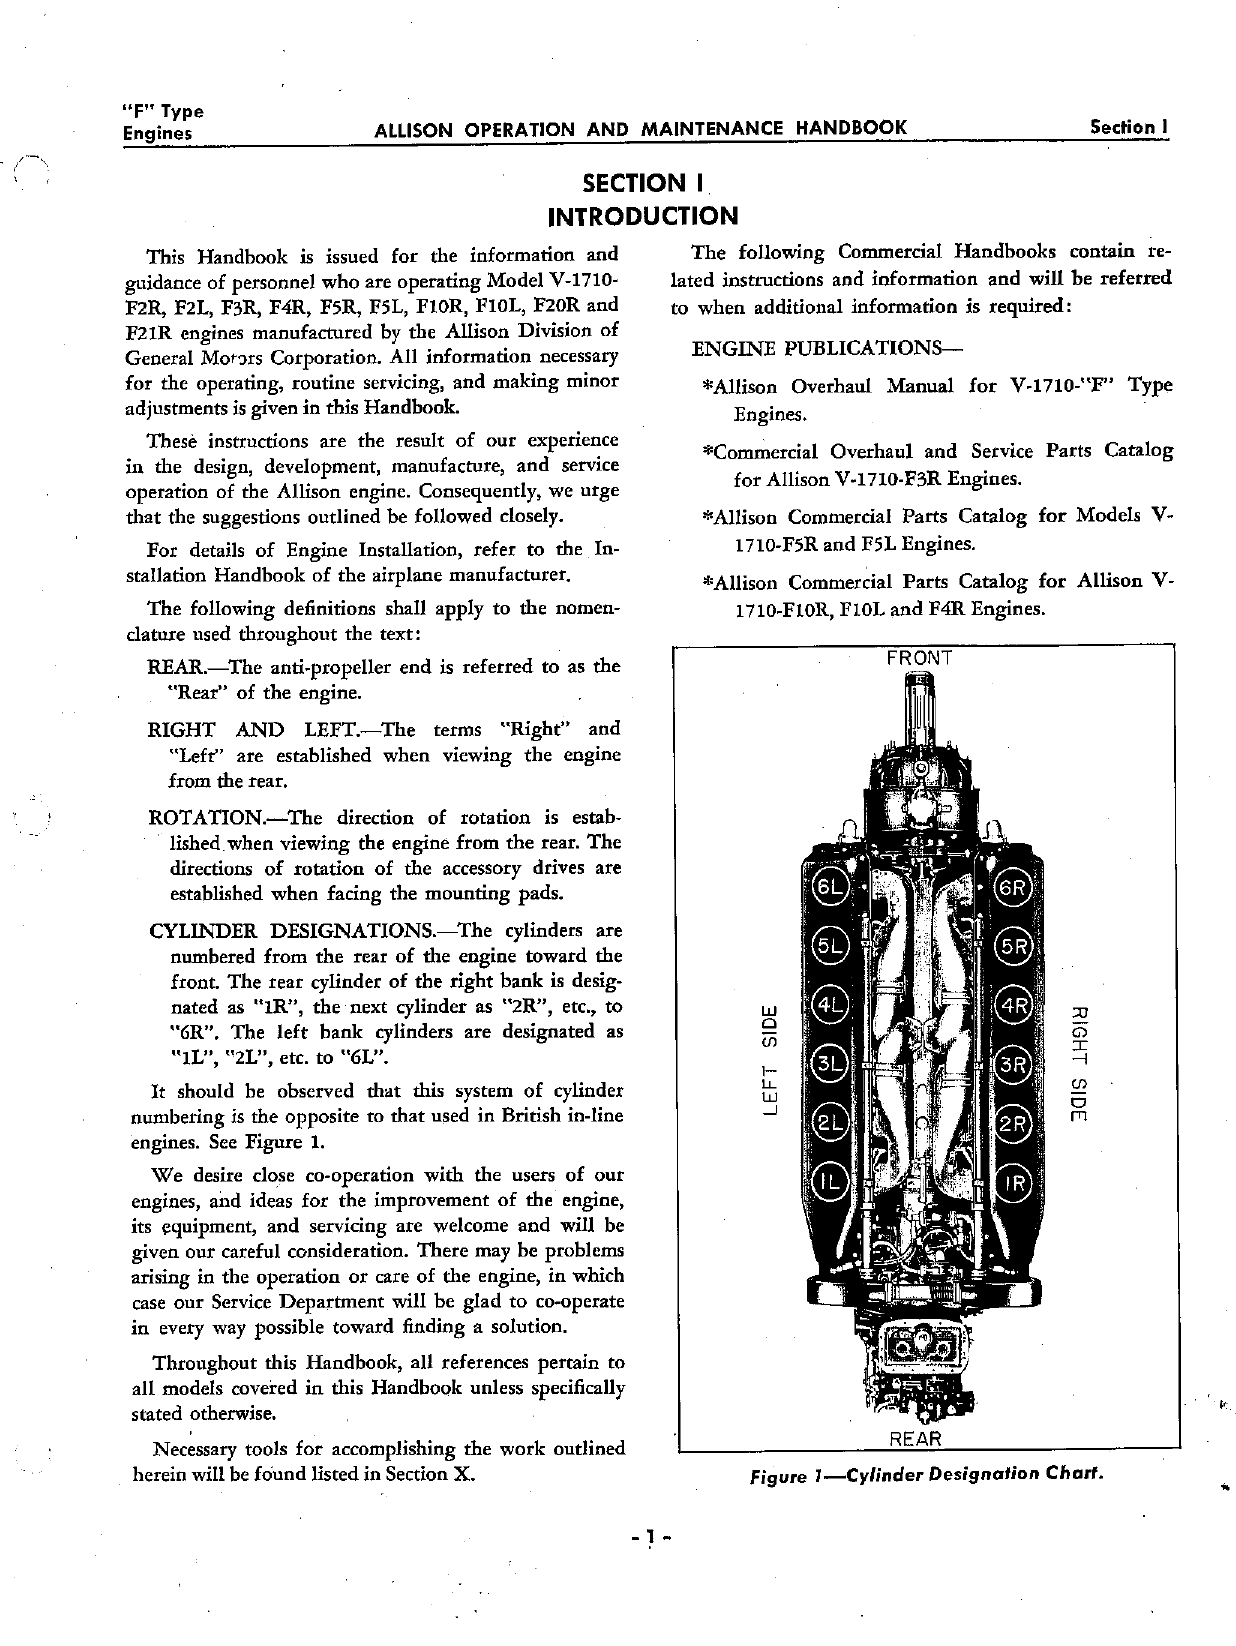 Sample page 7 from AirCorps Library document: Operation and Maintenance for Allison V-1710 F Type Engines - Third Edition